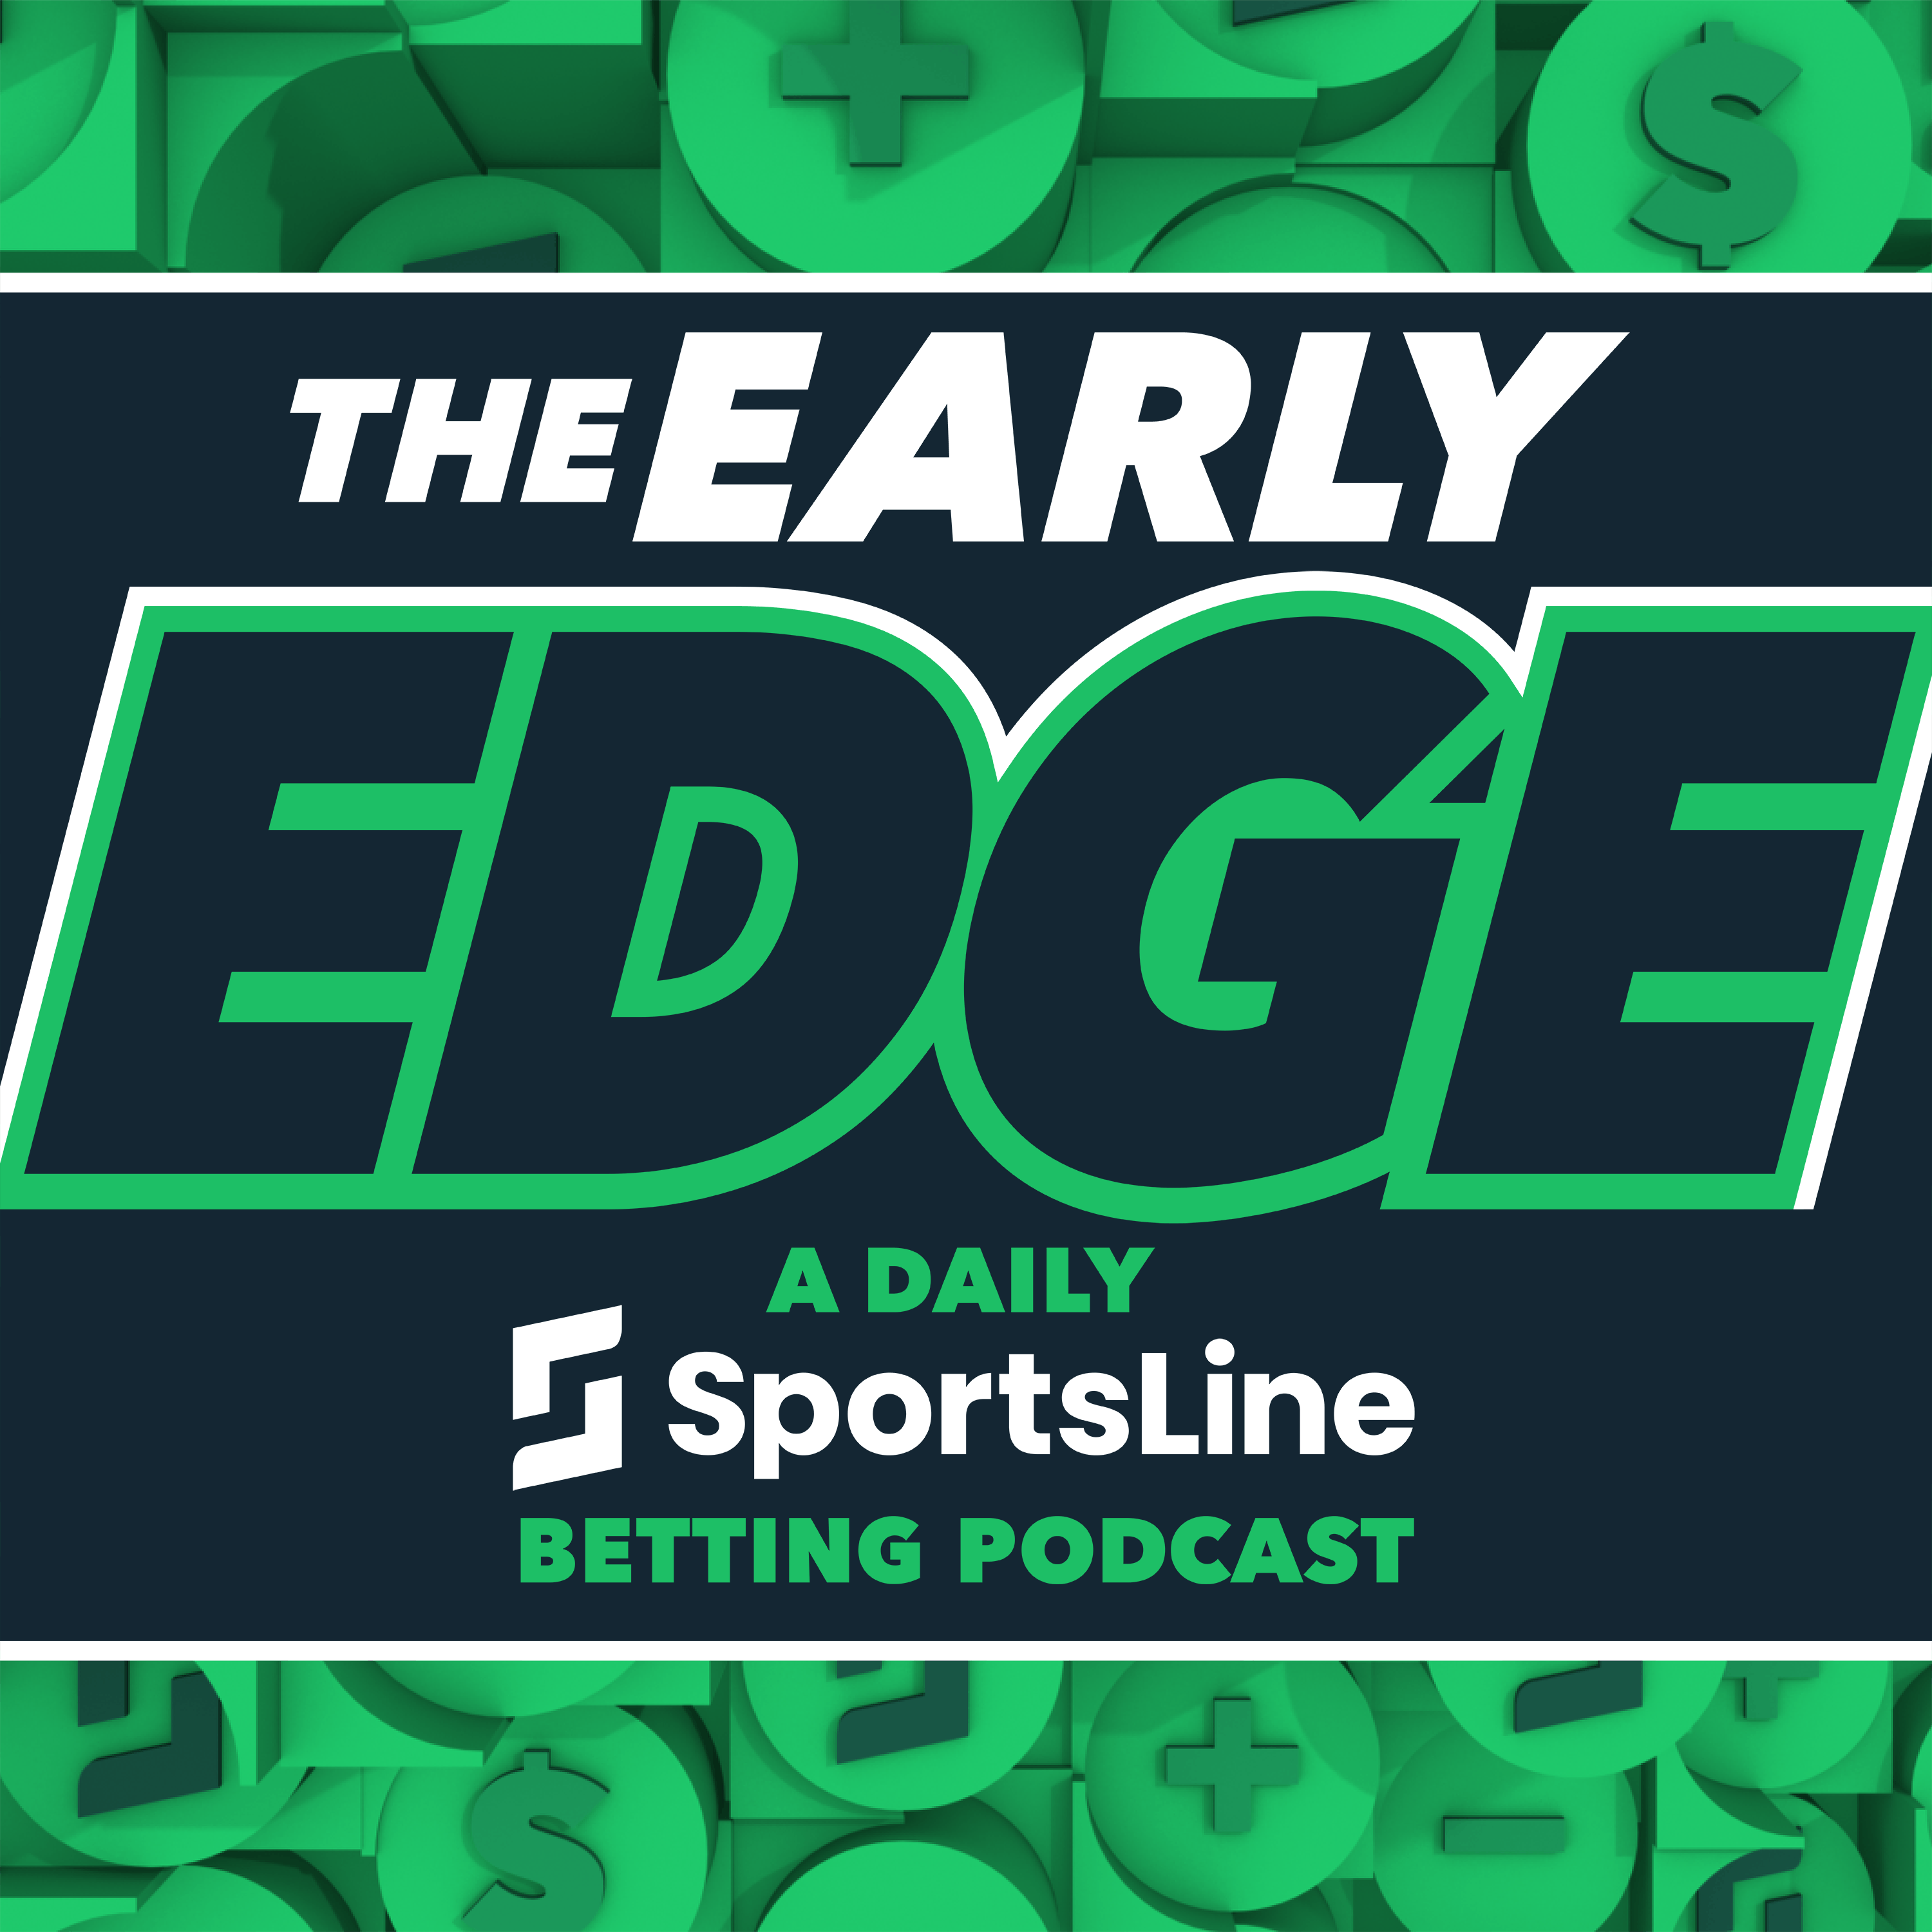 Wednesday's BEST BETS: NBA Play In Tournament Bets & MLB Picks & Props! | The Early Edge